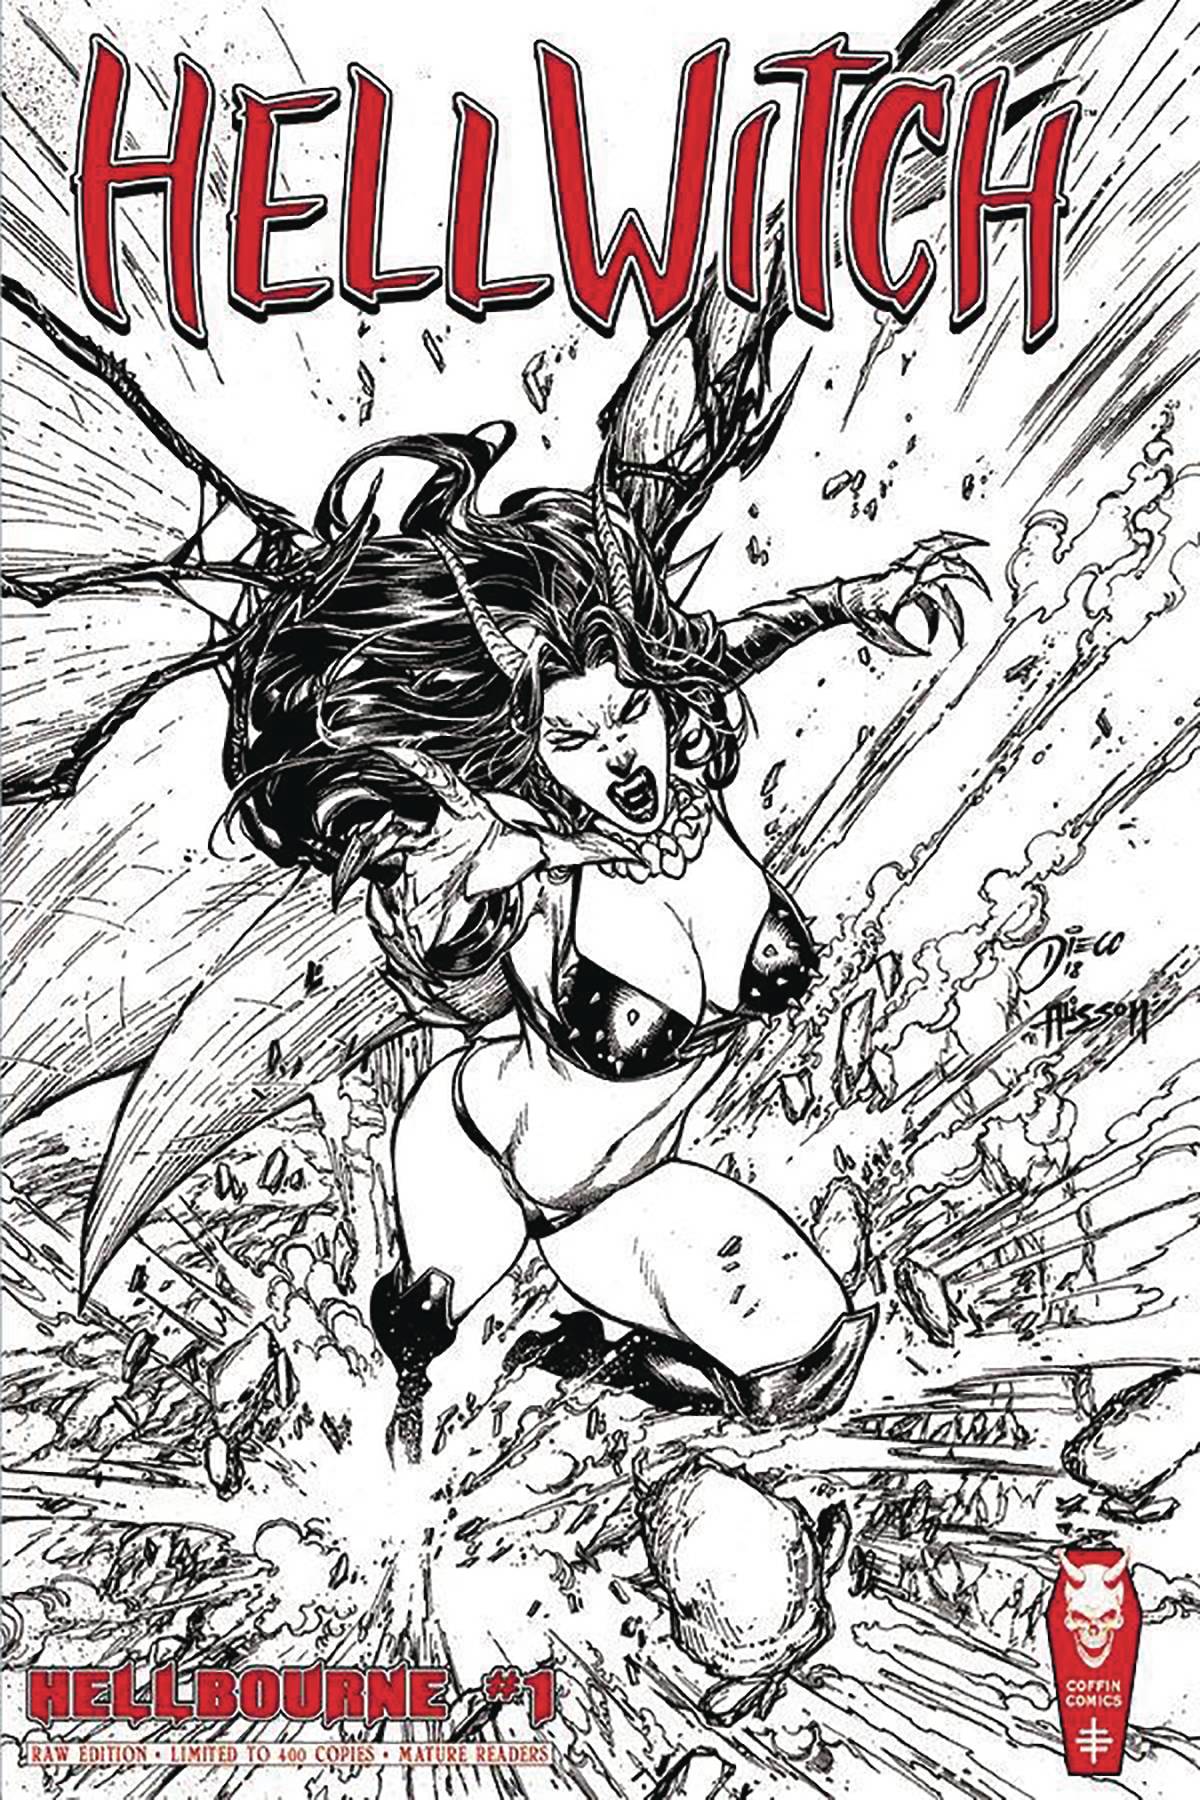 Hellwitch Hellbourne #1 Signed & Numbered Raw Edition (Mature)